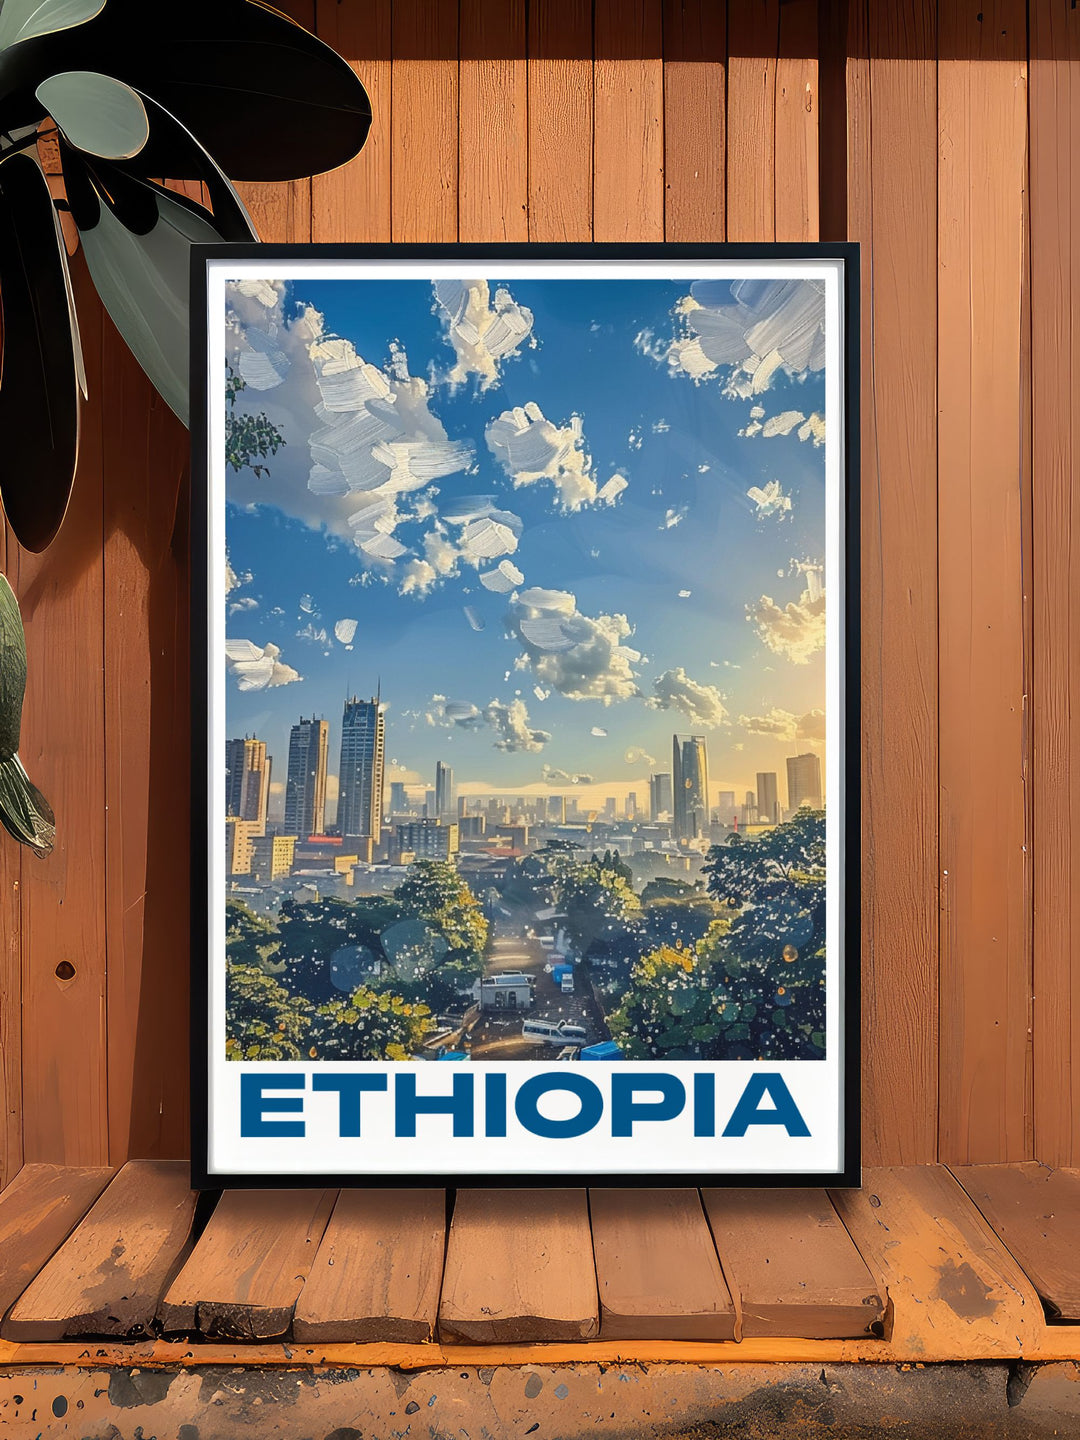 Addis Ababa Travel Poster featuring Ethiopias bustling city life and colorful scenery an excellent choice for unique home decor and thoughtful gifts for special occasions such as anniversaries birthdays and holidays